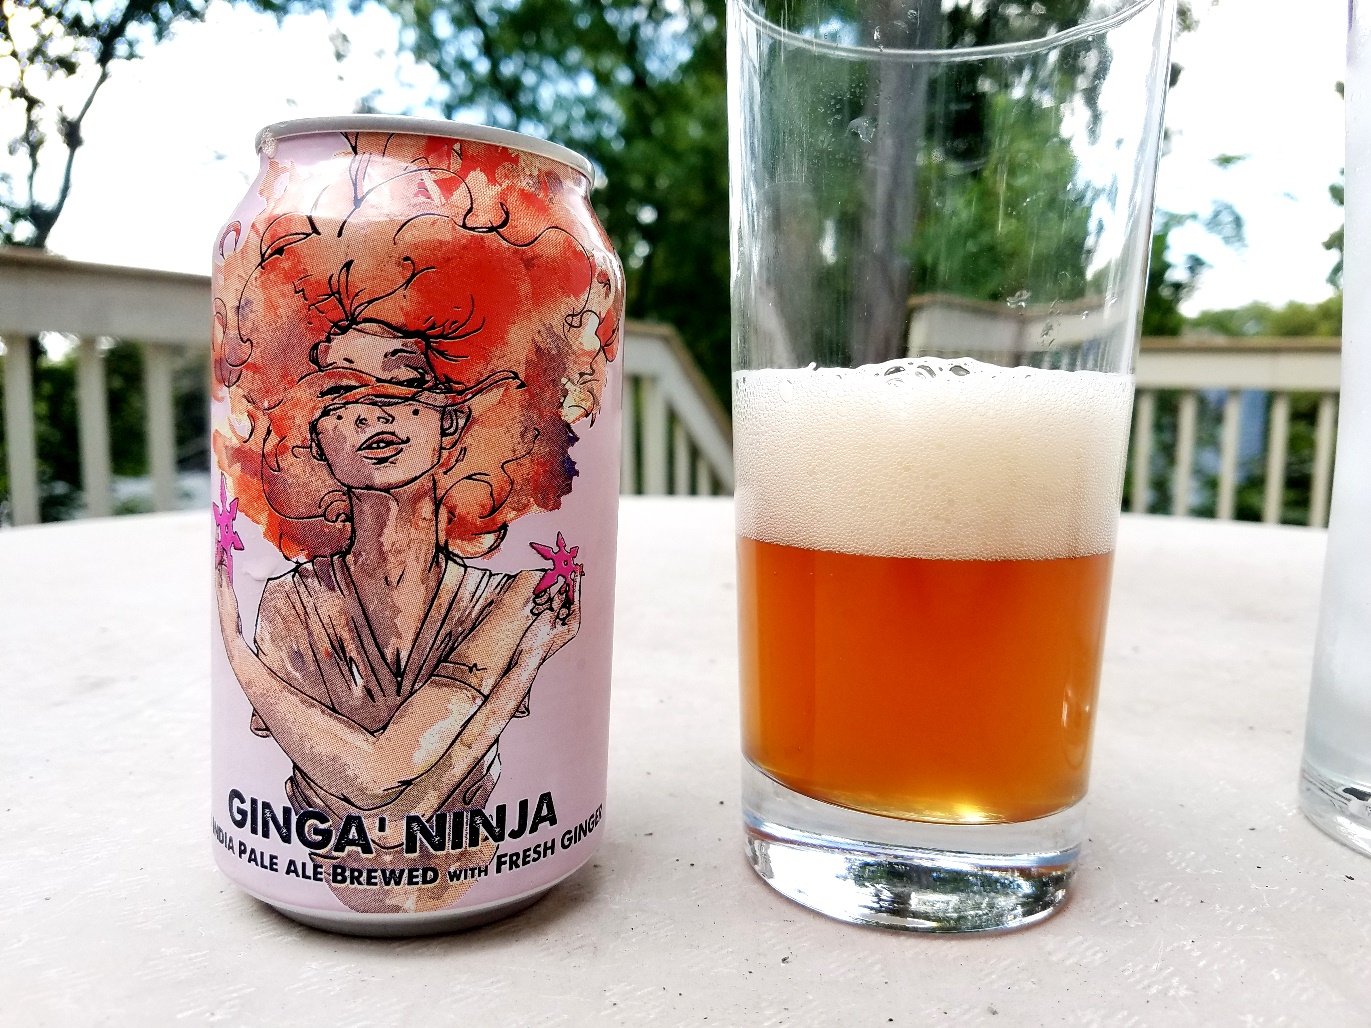 Black Hog, Ginga’ Ninja Red India Pale Ale-Brewed Beer with Fresh Ginger, Connecticut , Wine Casual